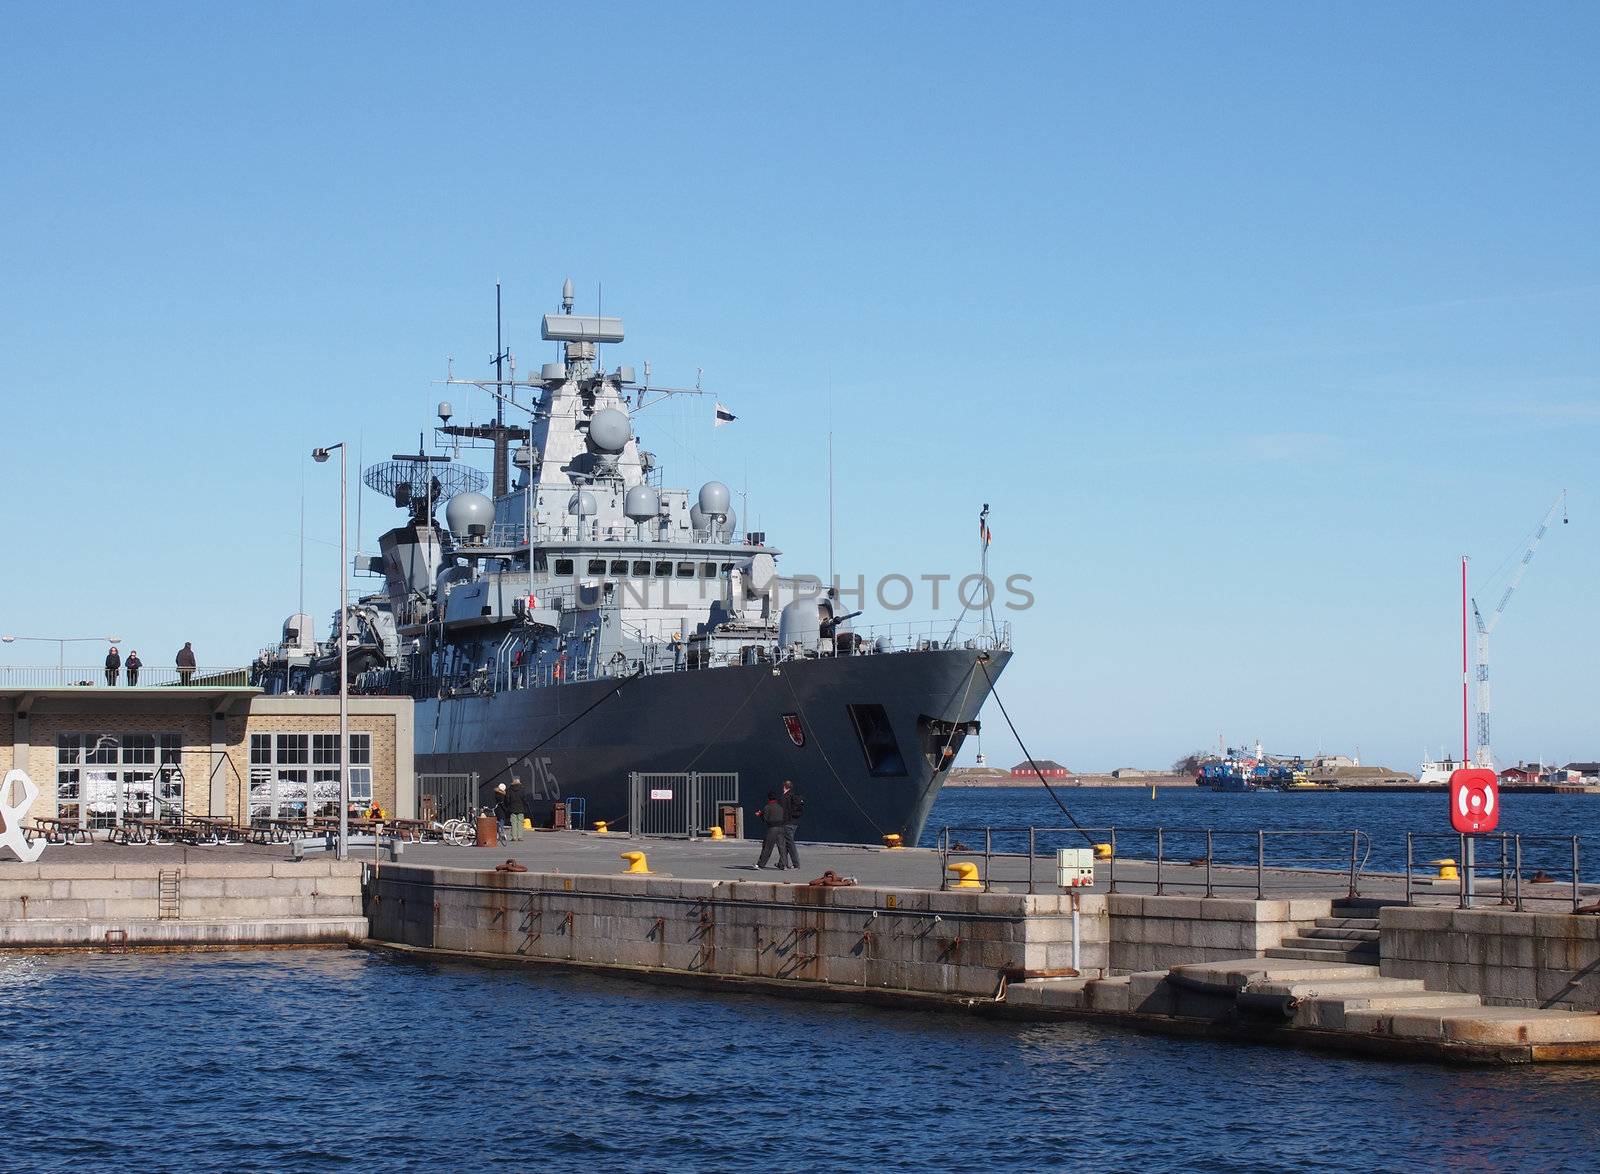 COPENHAGEN - MARCH 3: The F215 Brandenburg, a German frigate docked at Langelinie Harbor in Central Copenhagen, Denmark on March 3, 2013. This German Navy frigate was commissioned on October 14, 1994.